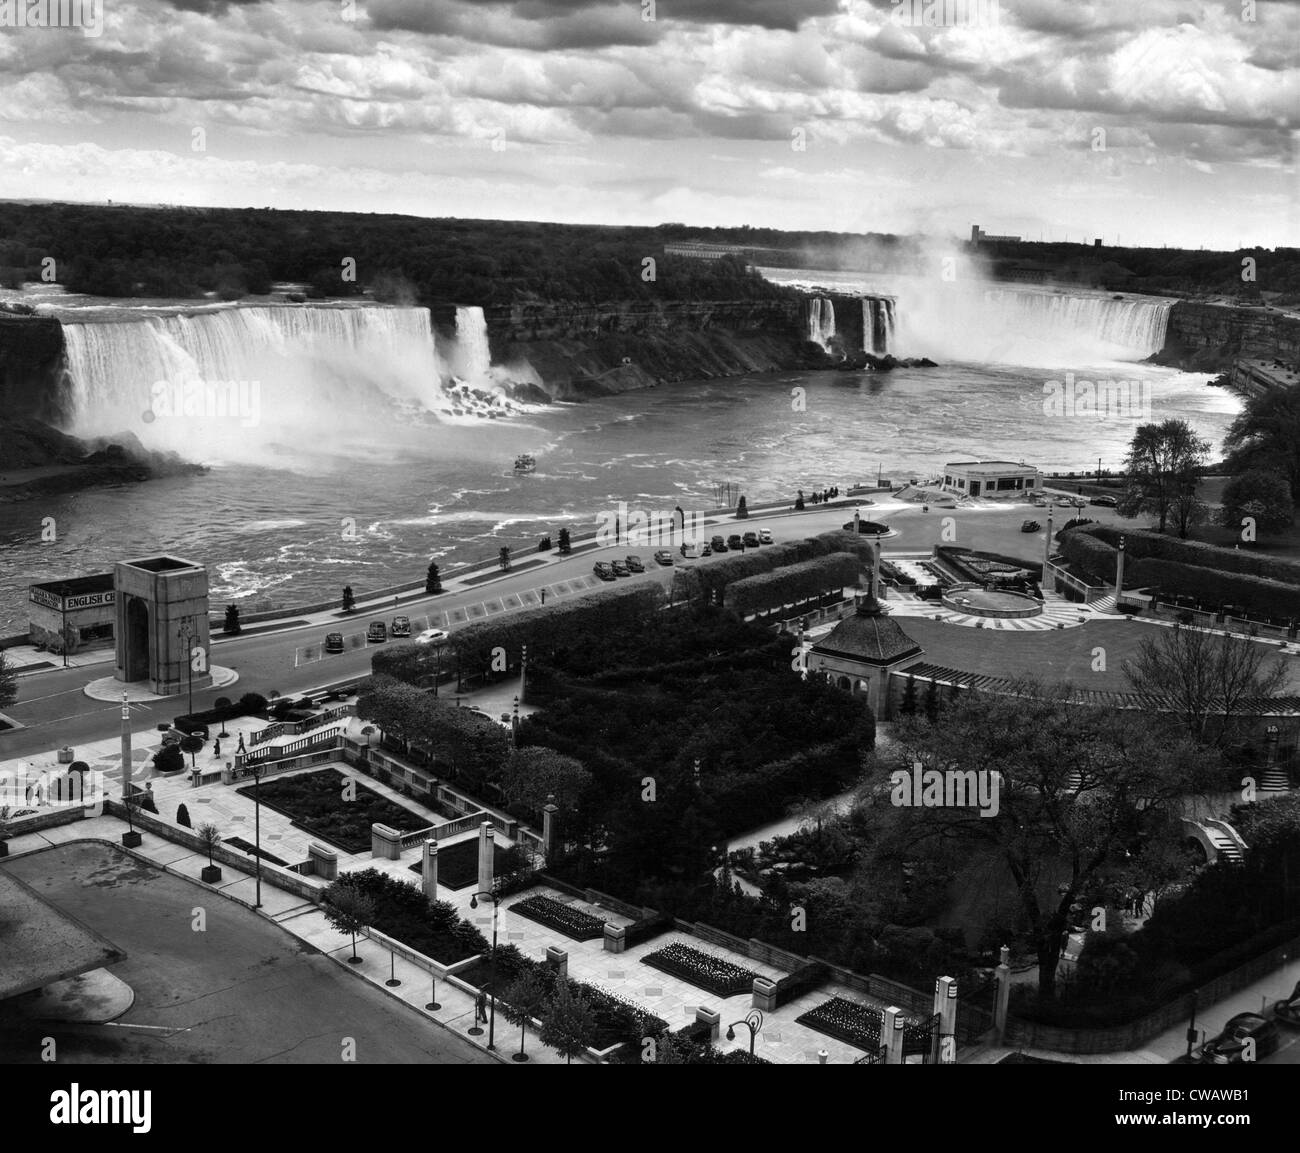 Niagara Falls, from the Canadian side, to the left is the American Falls. Circa 1940s. Courtesy: CSU Archives/Everett Collection Stock Photo